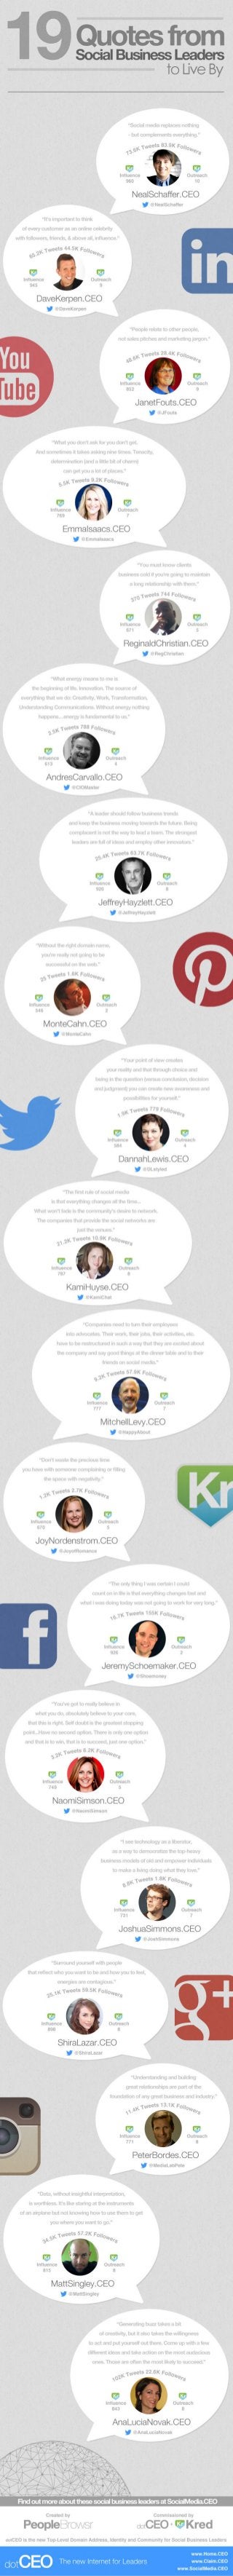 19 Quotes from Social Business Leaders on dotCEO